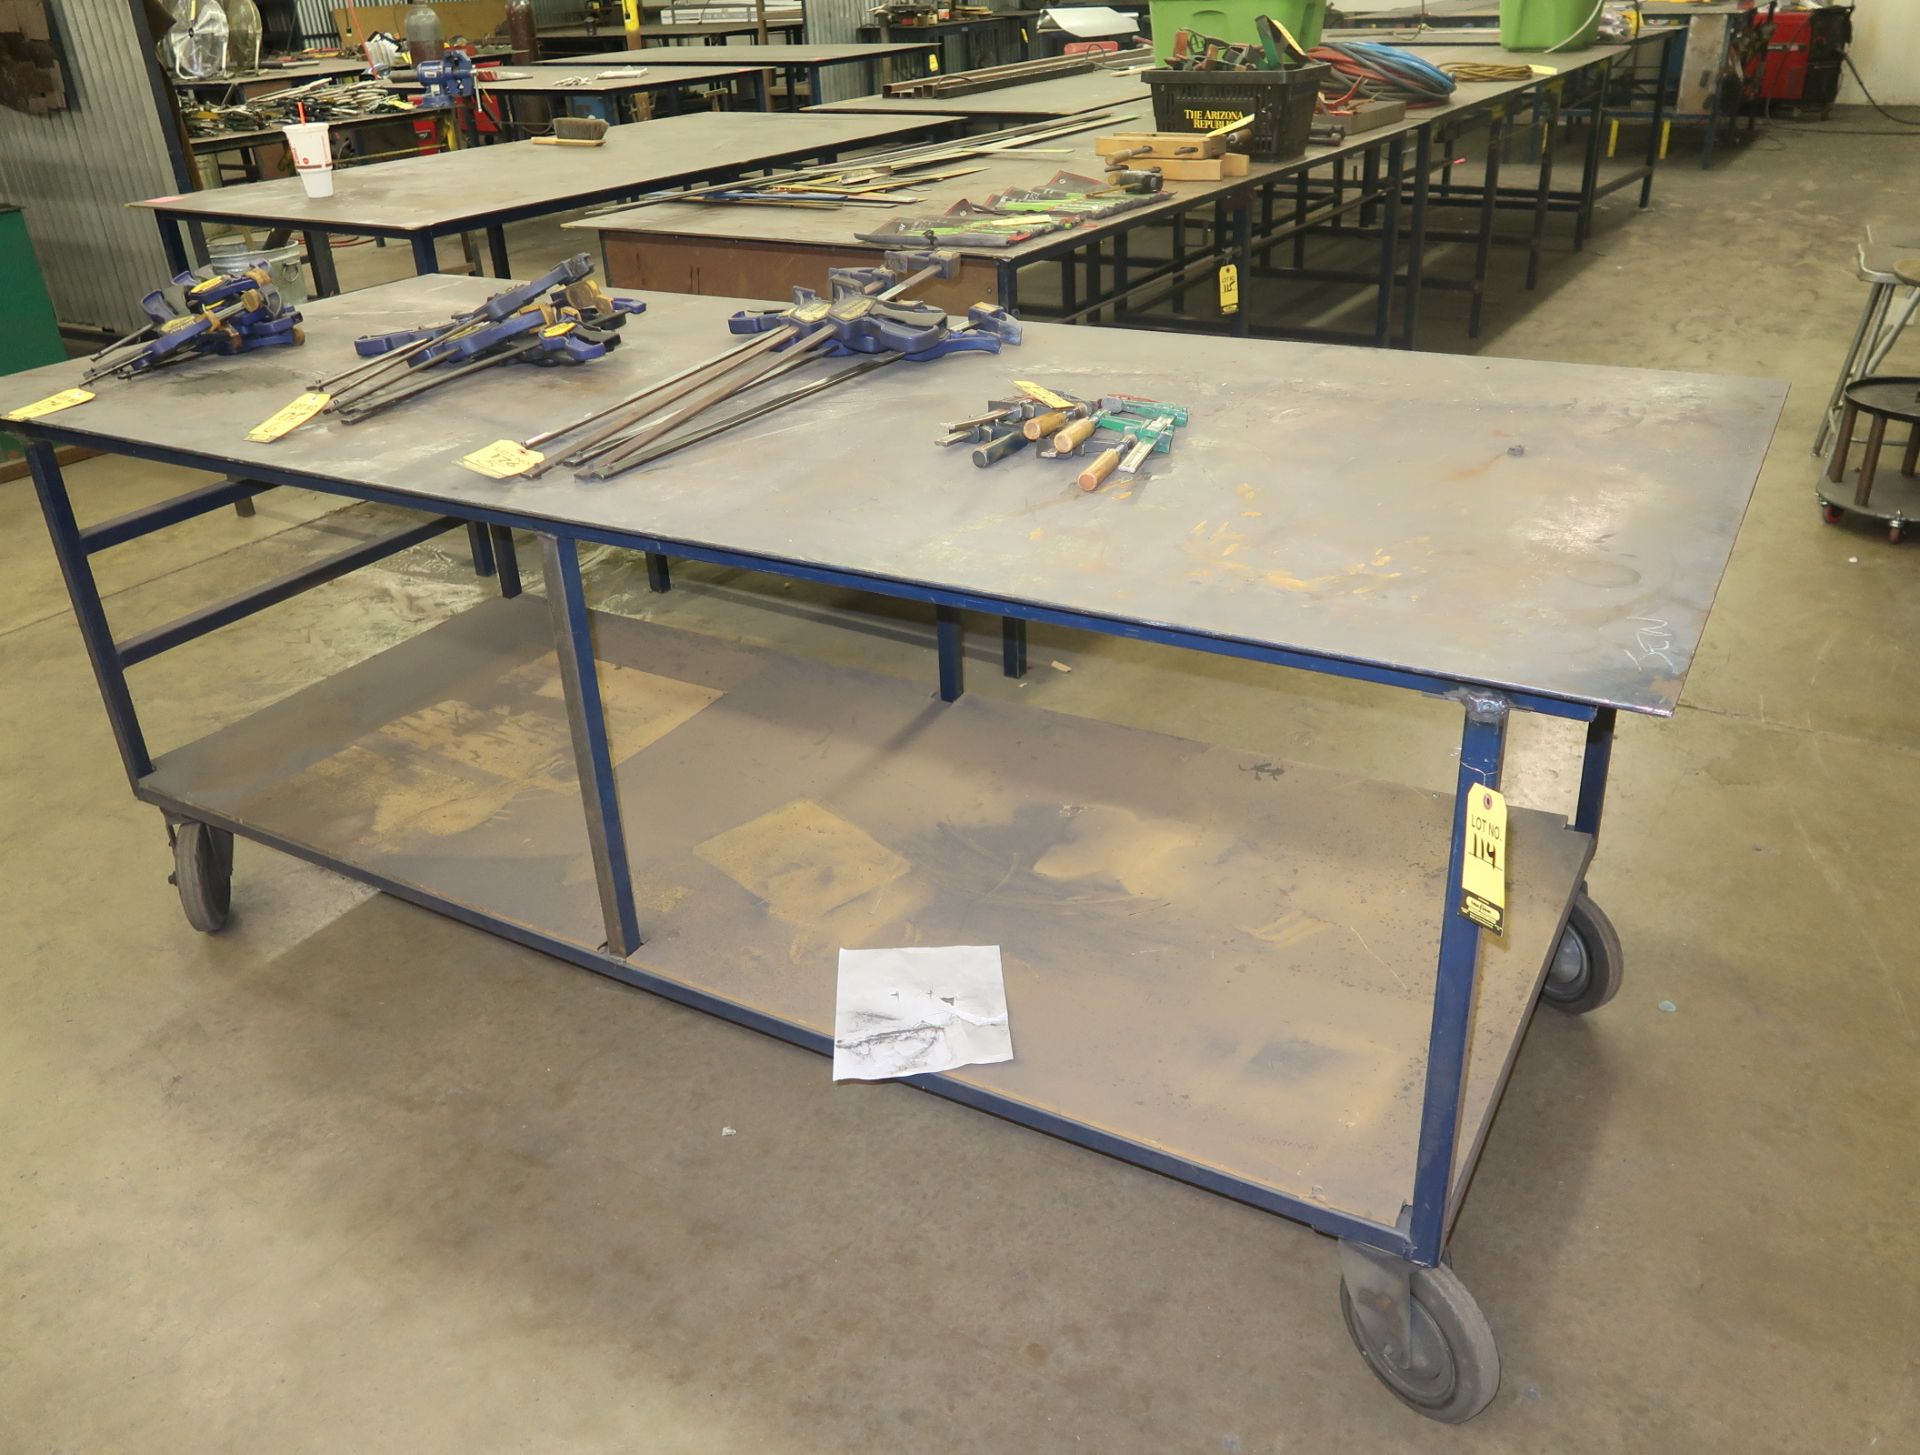 8' X 40" SET UP TABLE ON CASTERS